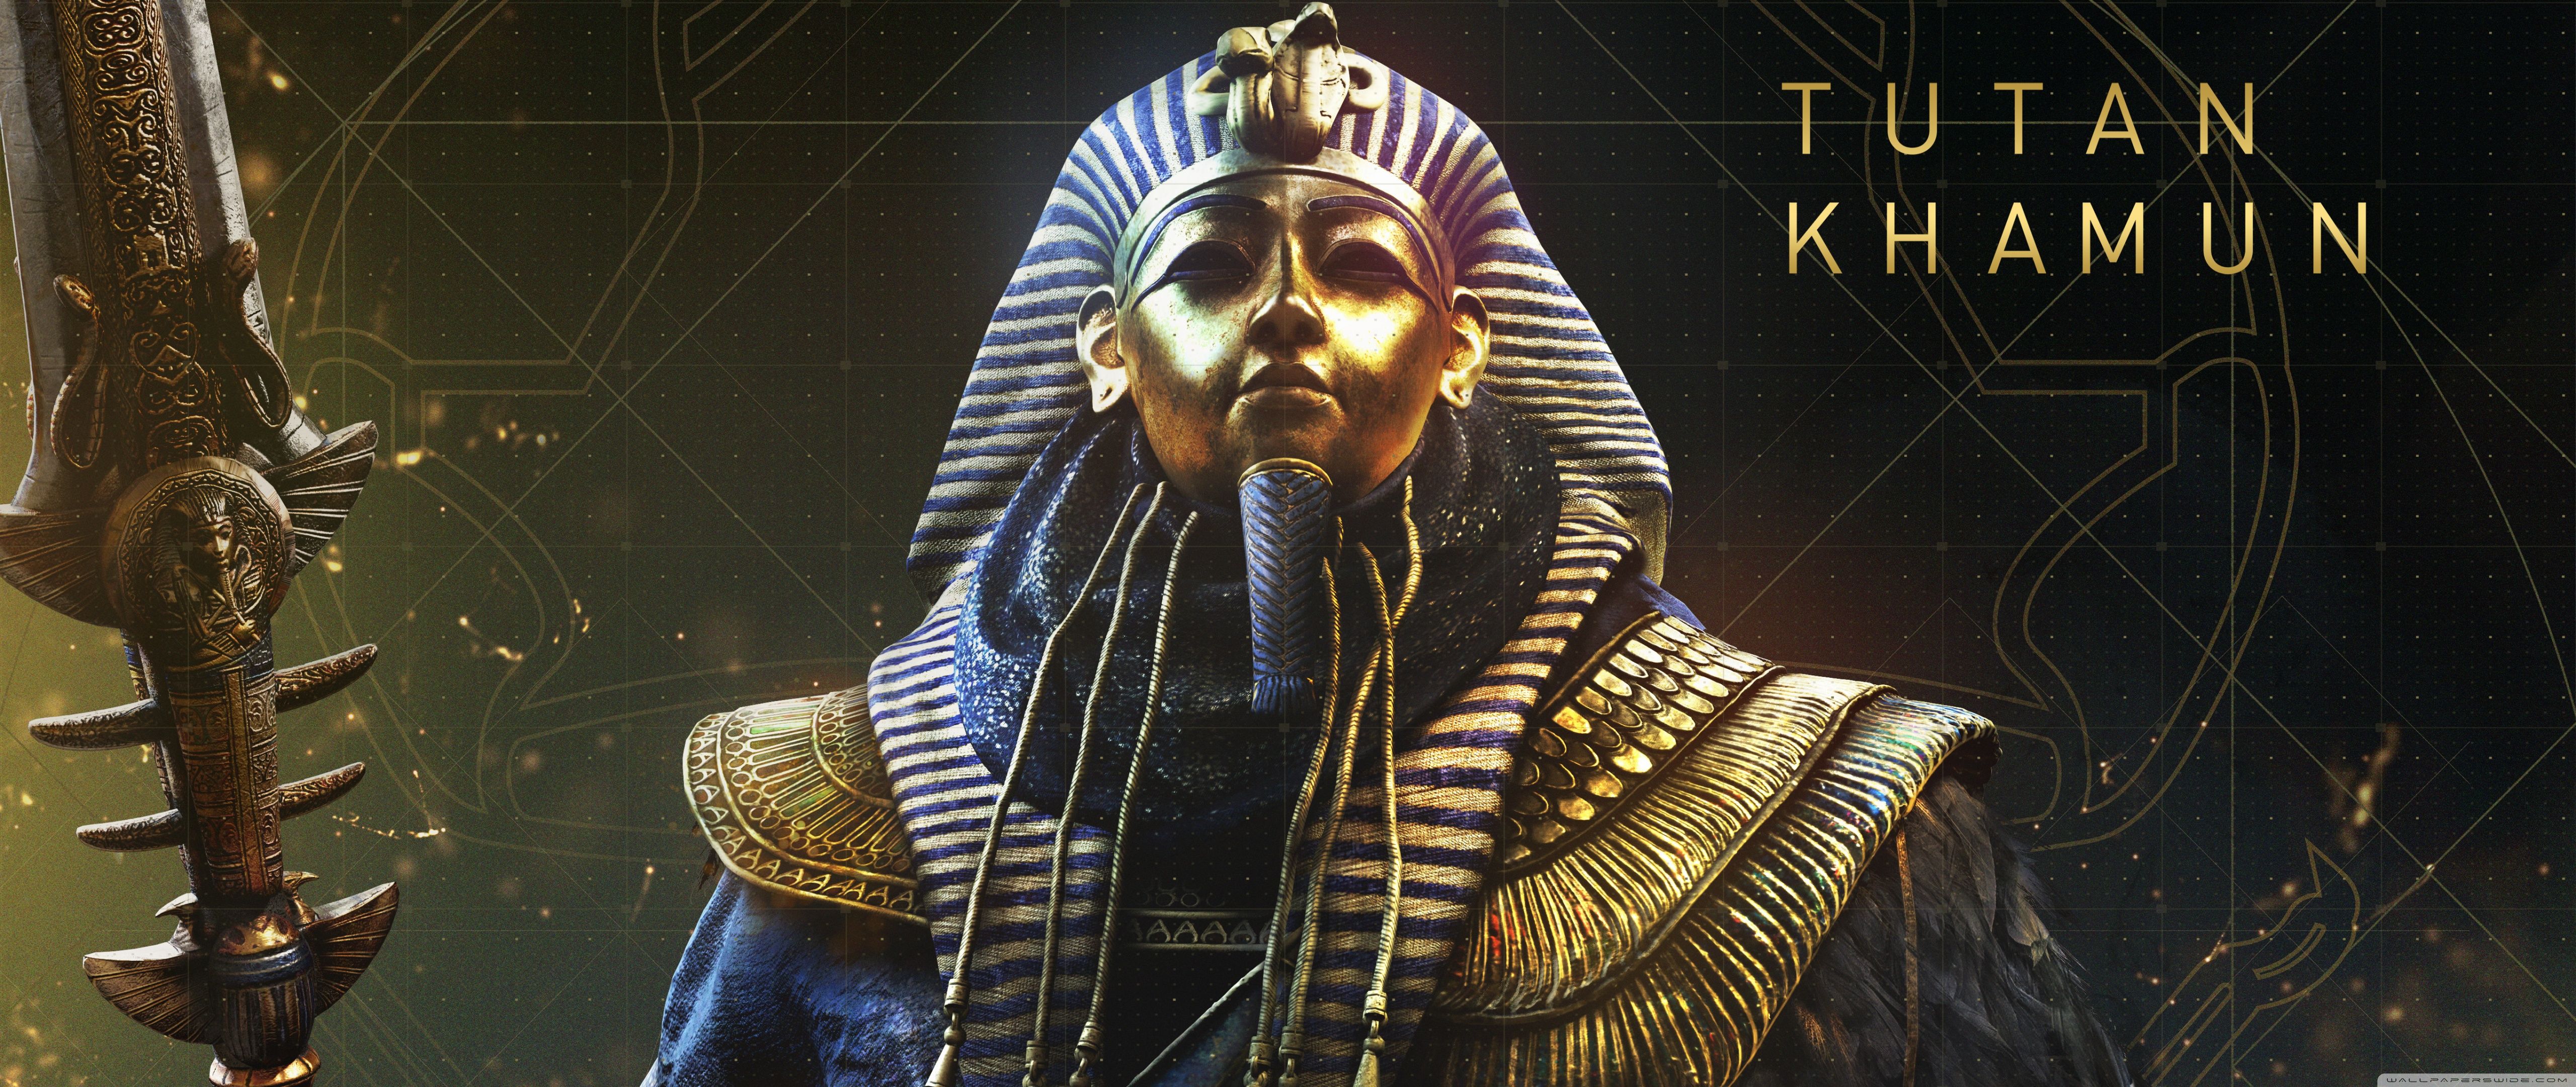 Assassin's Creed Origins The Curse Of The Pharaohs Tutankhamun Ultra HD Desktop Background Wallpaper for: Multi Display, Dual Monitor, Tablet